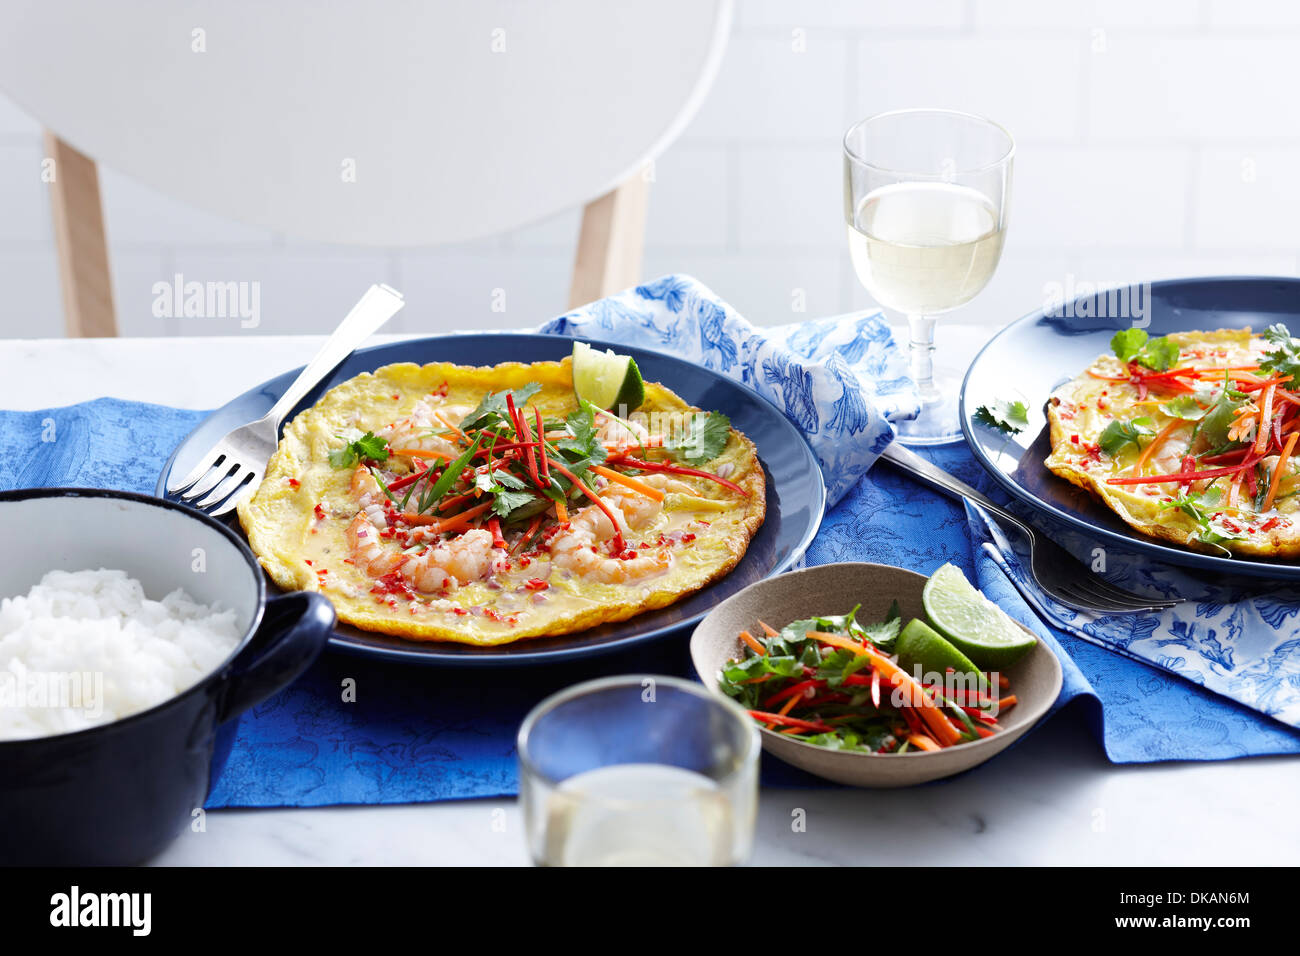 Meal with vietnamese prawn omelette and salad Stock Photo